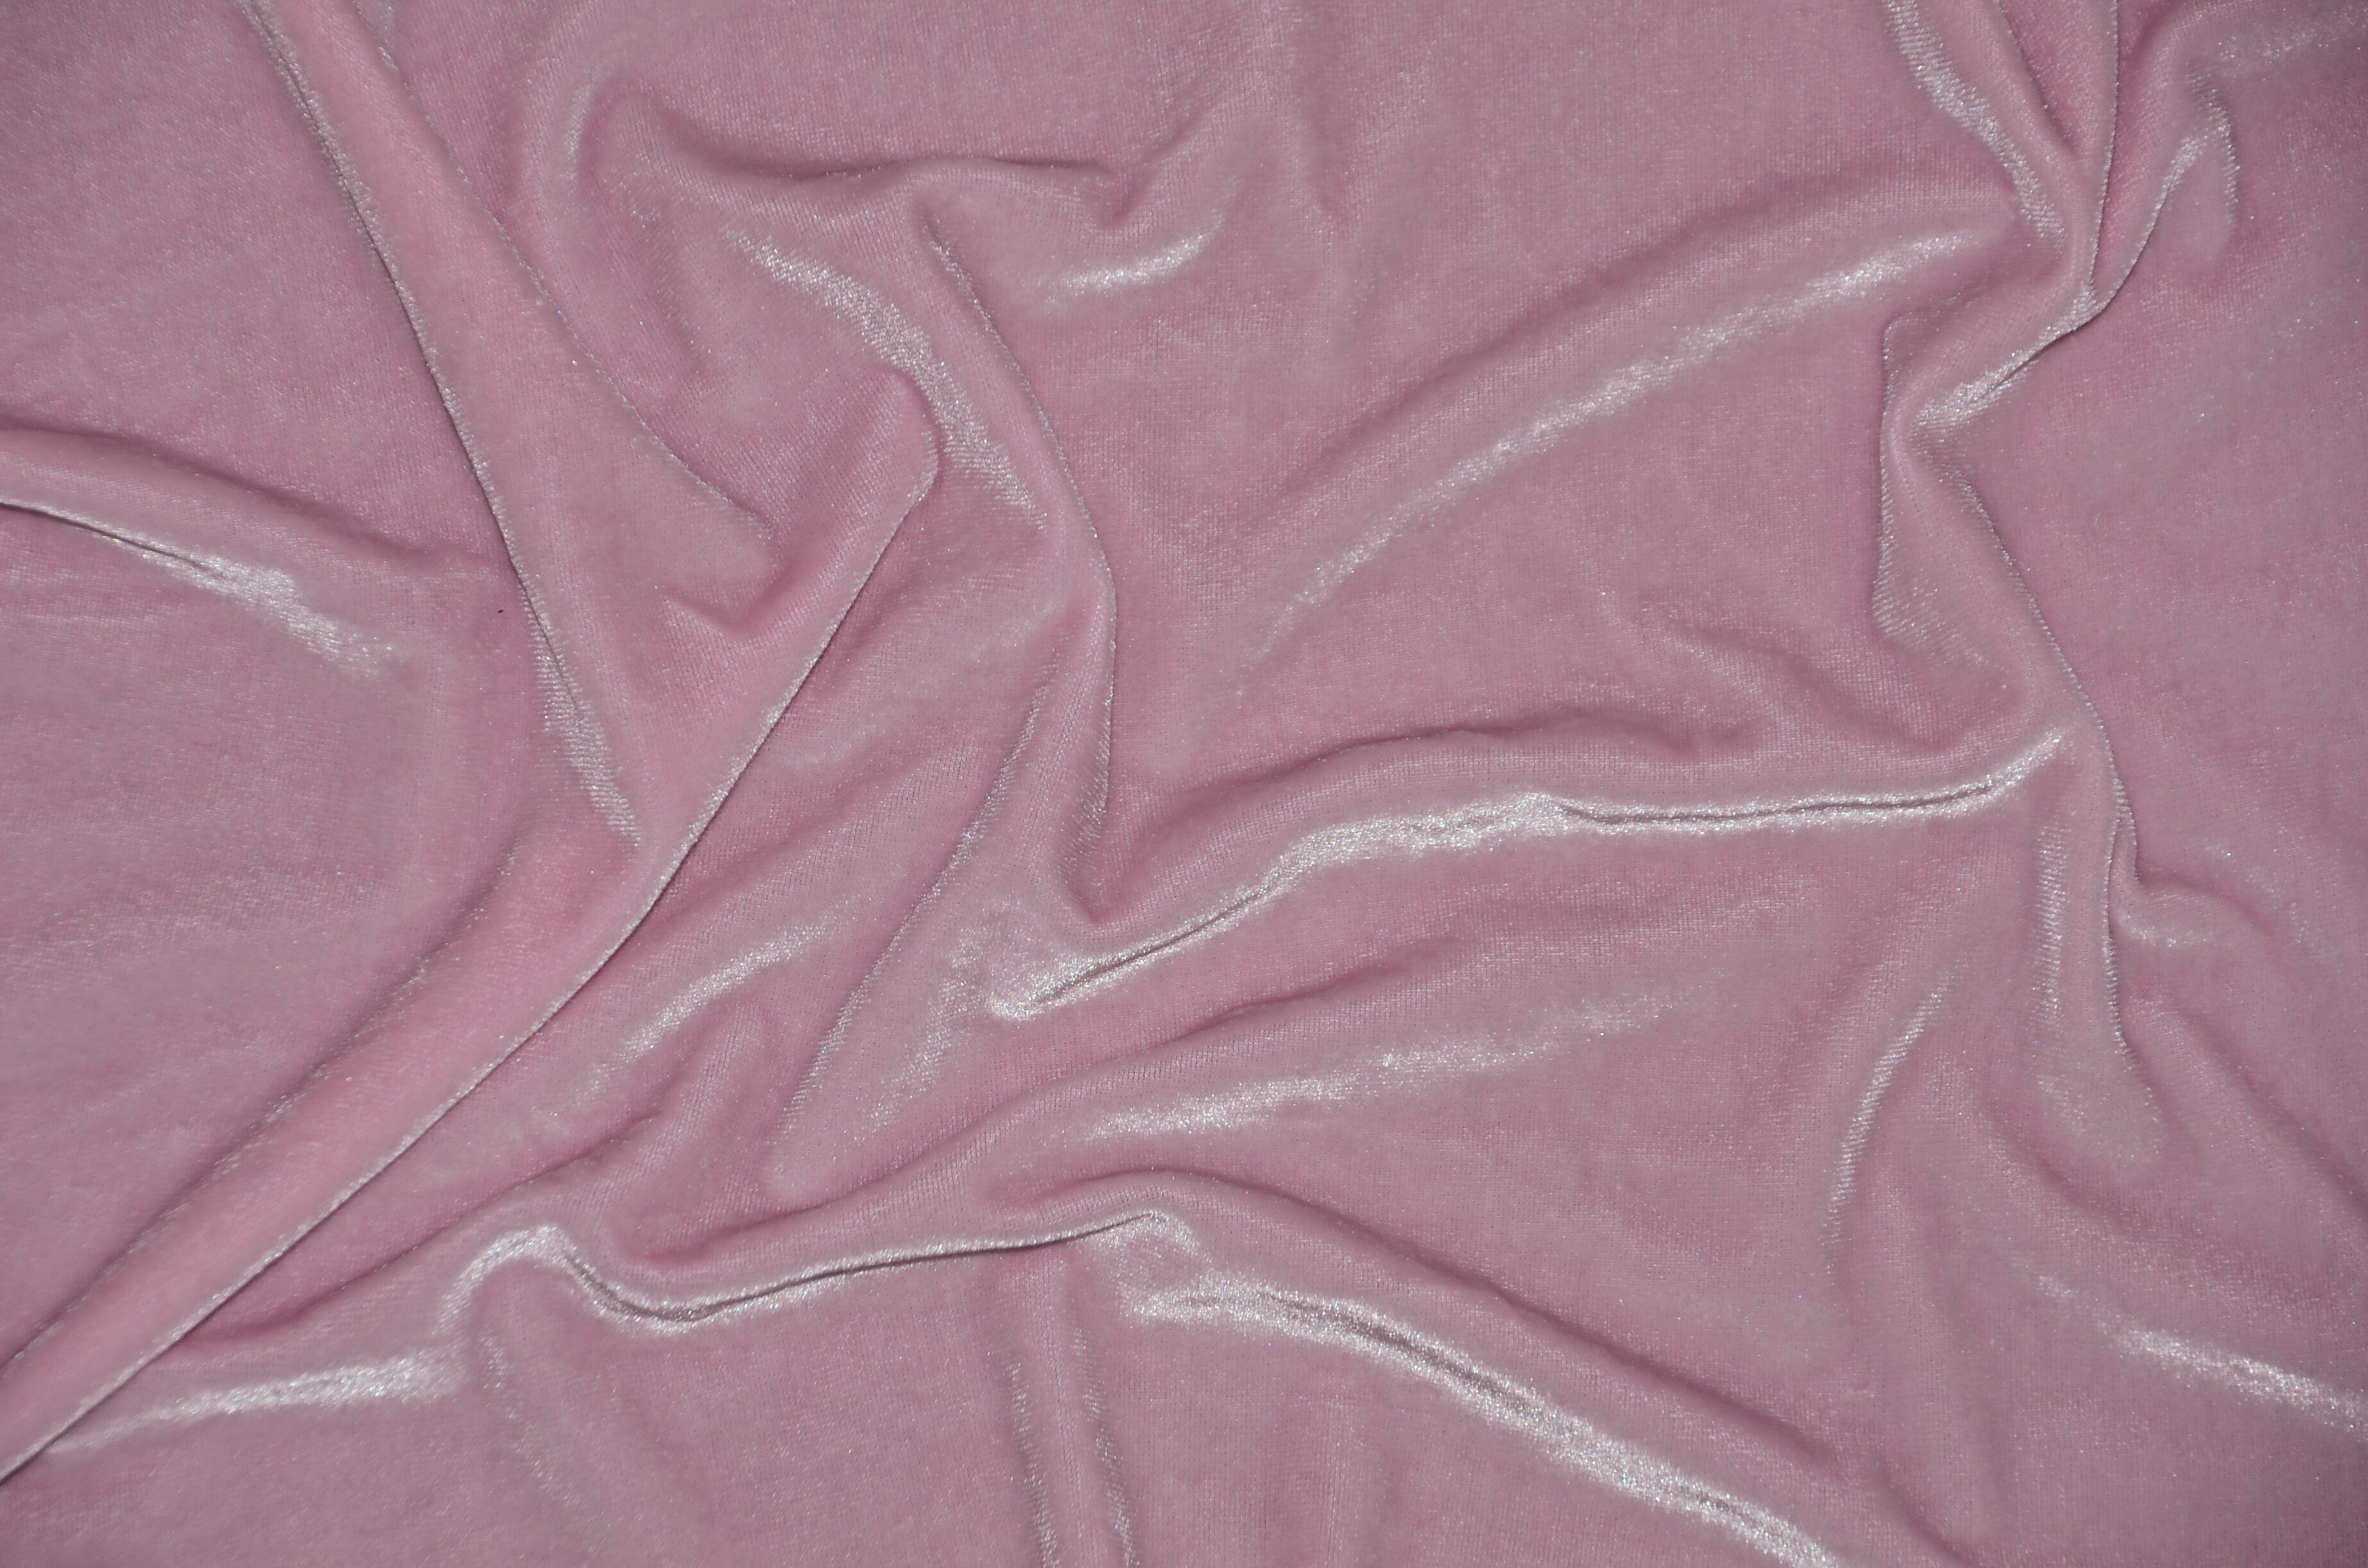 Soft and Plush Stretch Velvet Fabric | Stretch Velvet Spandex | 58" Wide | Spandex Velour for Apparel, Costume, Cosplay, Drapes | Fabric mytextilefabric Yards Pink 